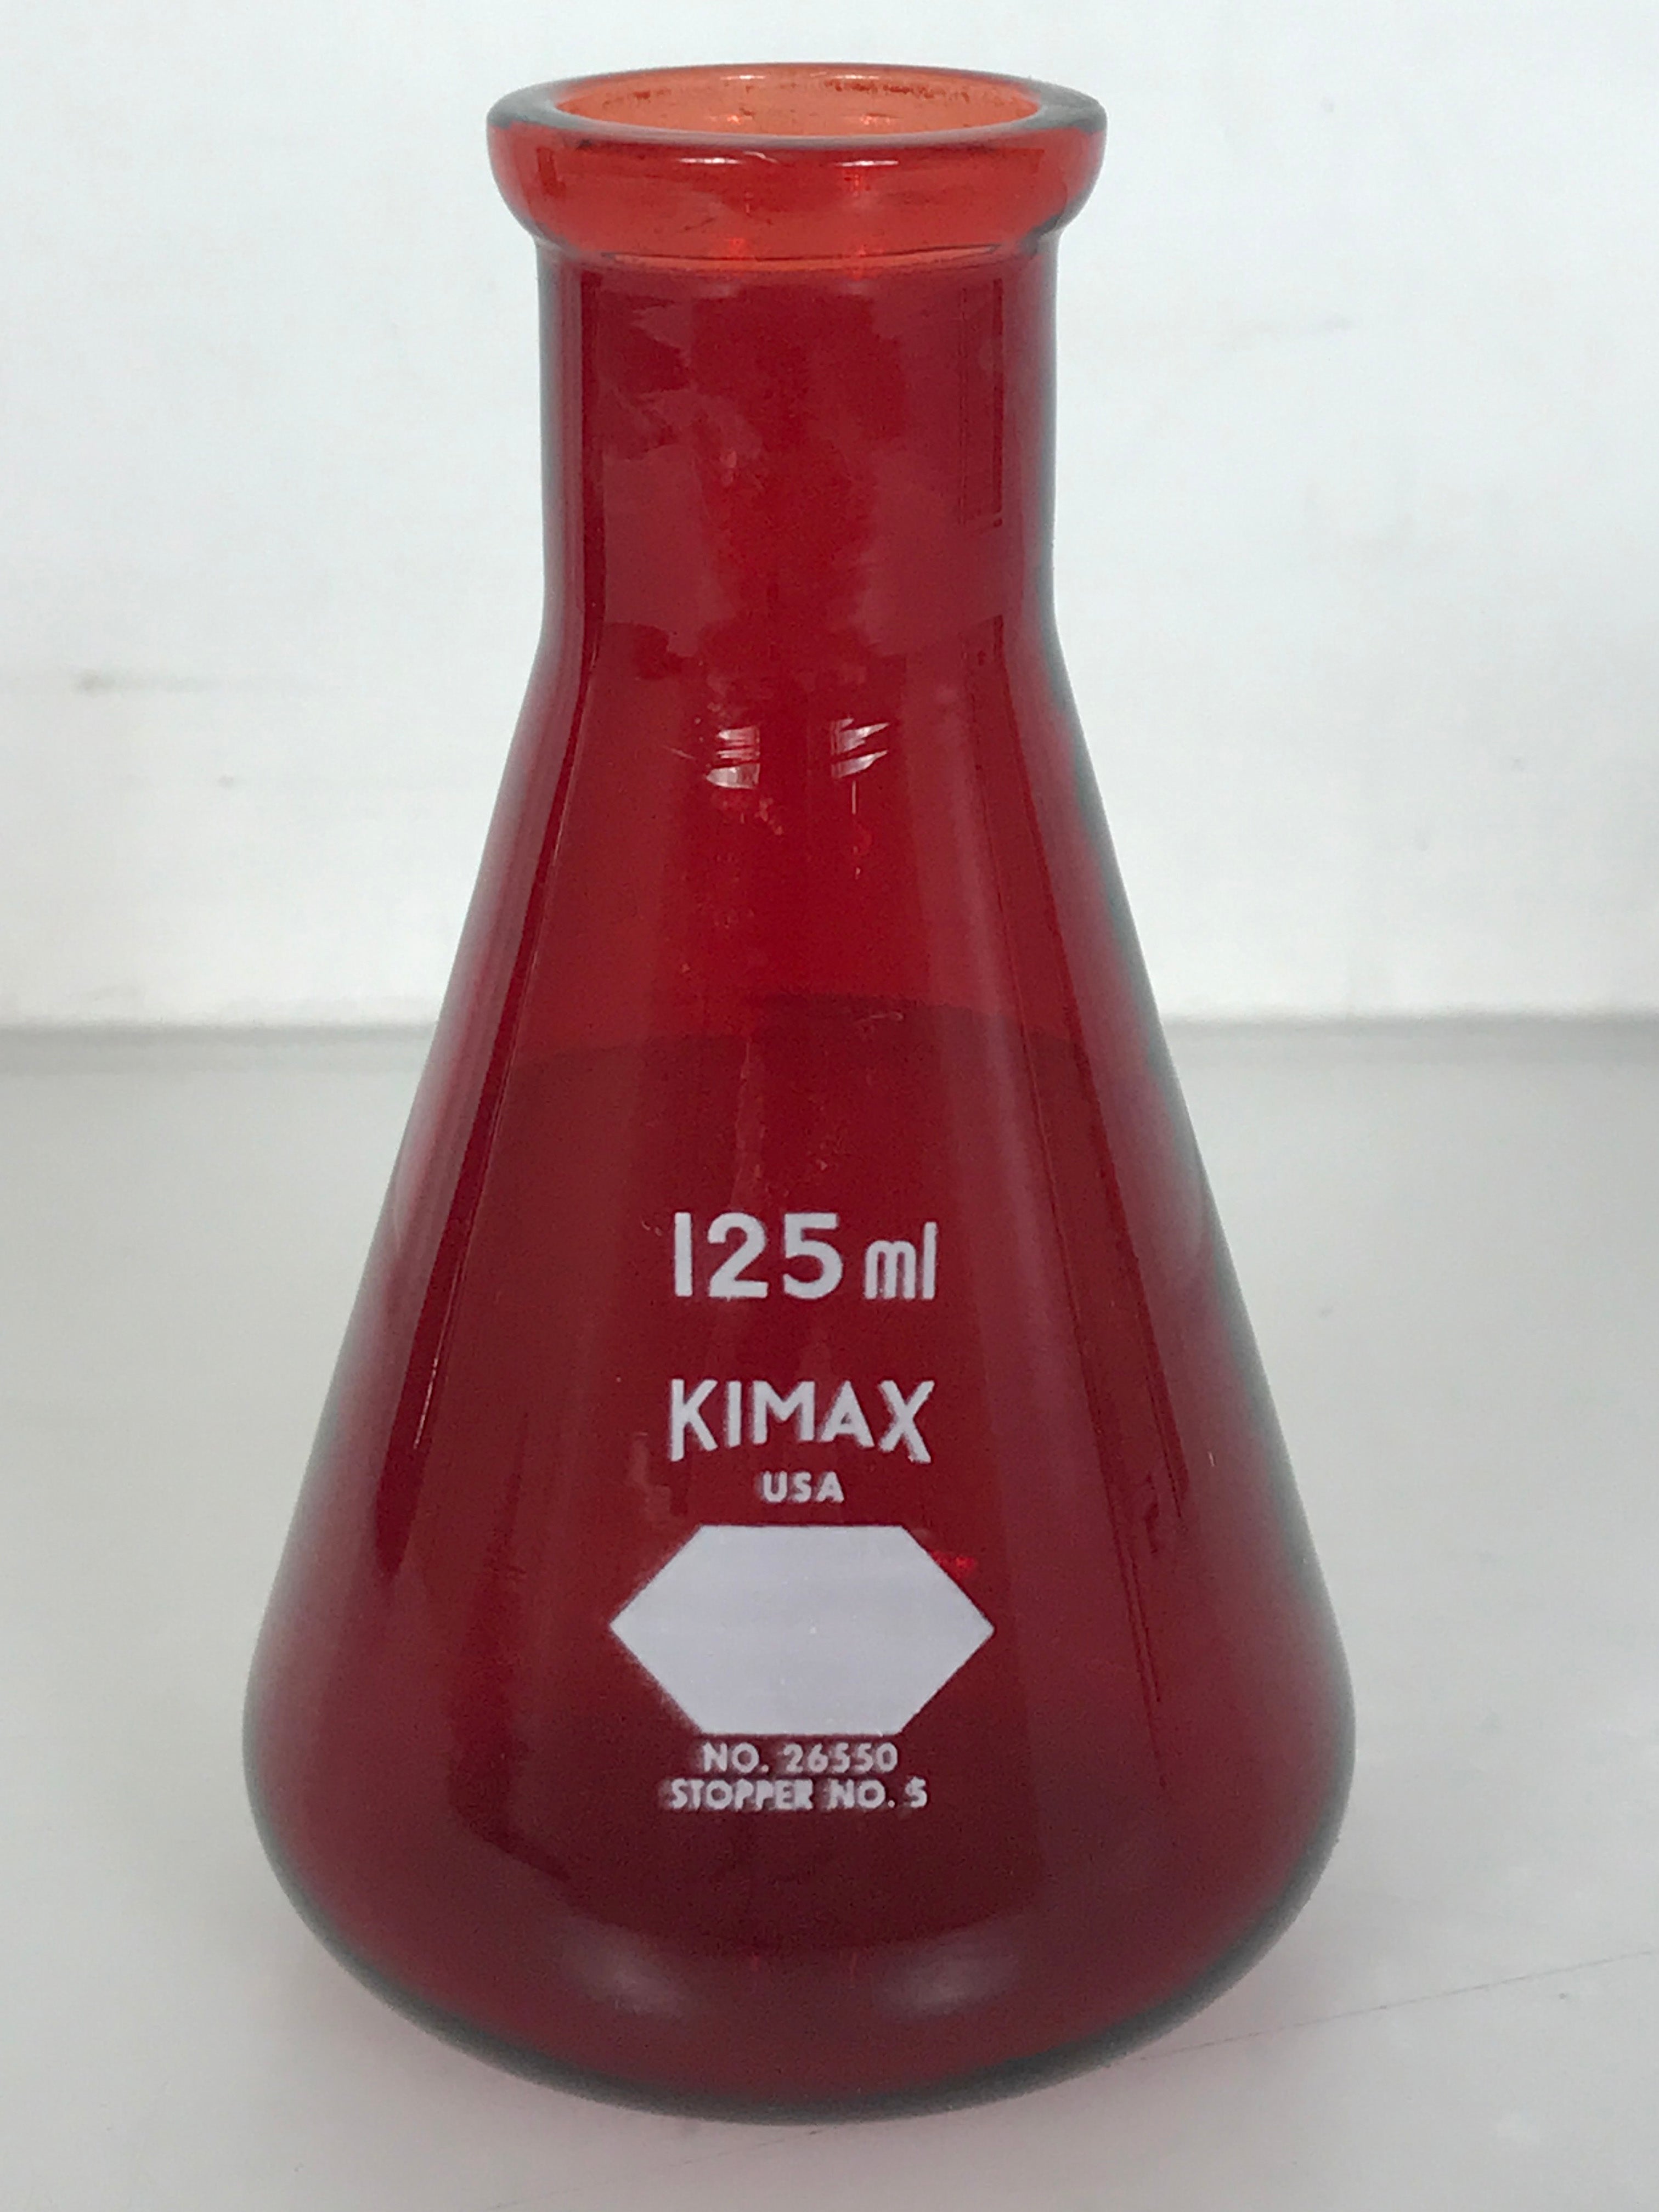 Kimax 125 mL Ruby Red Glass Erlenmeyer Flask No. 26550